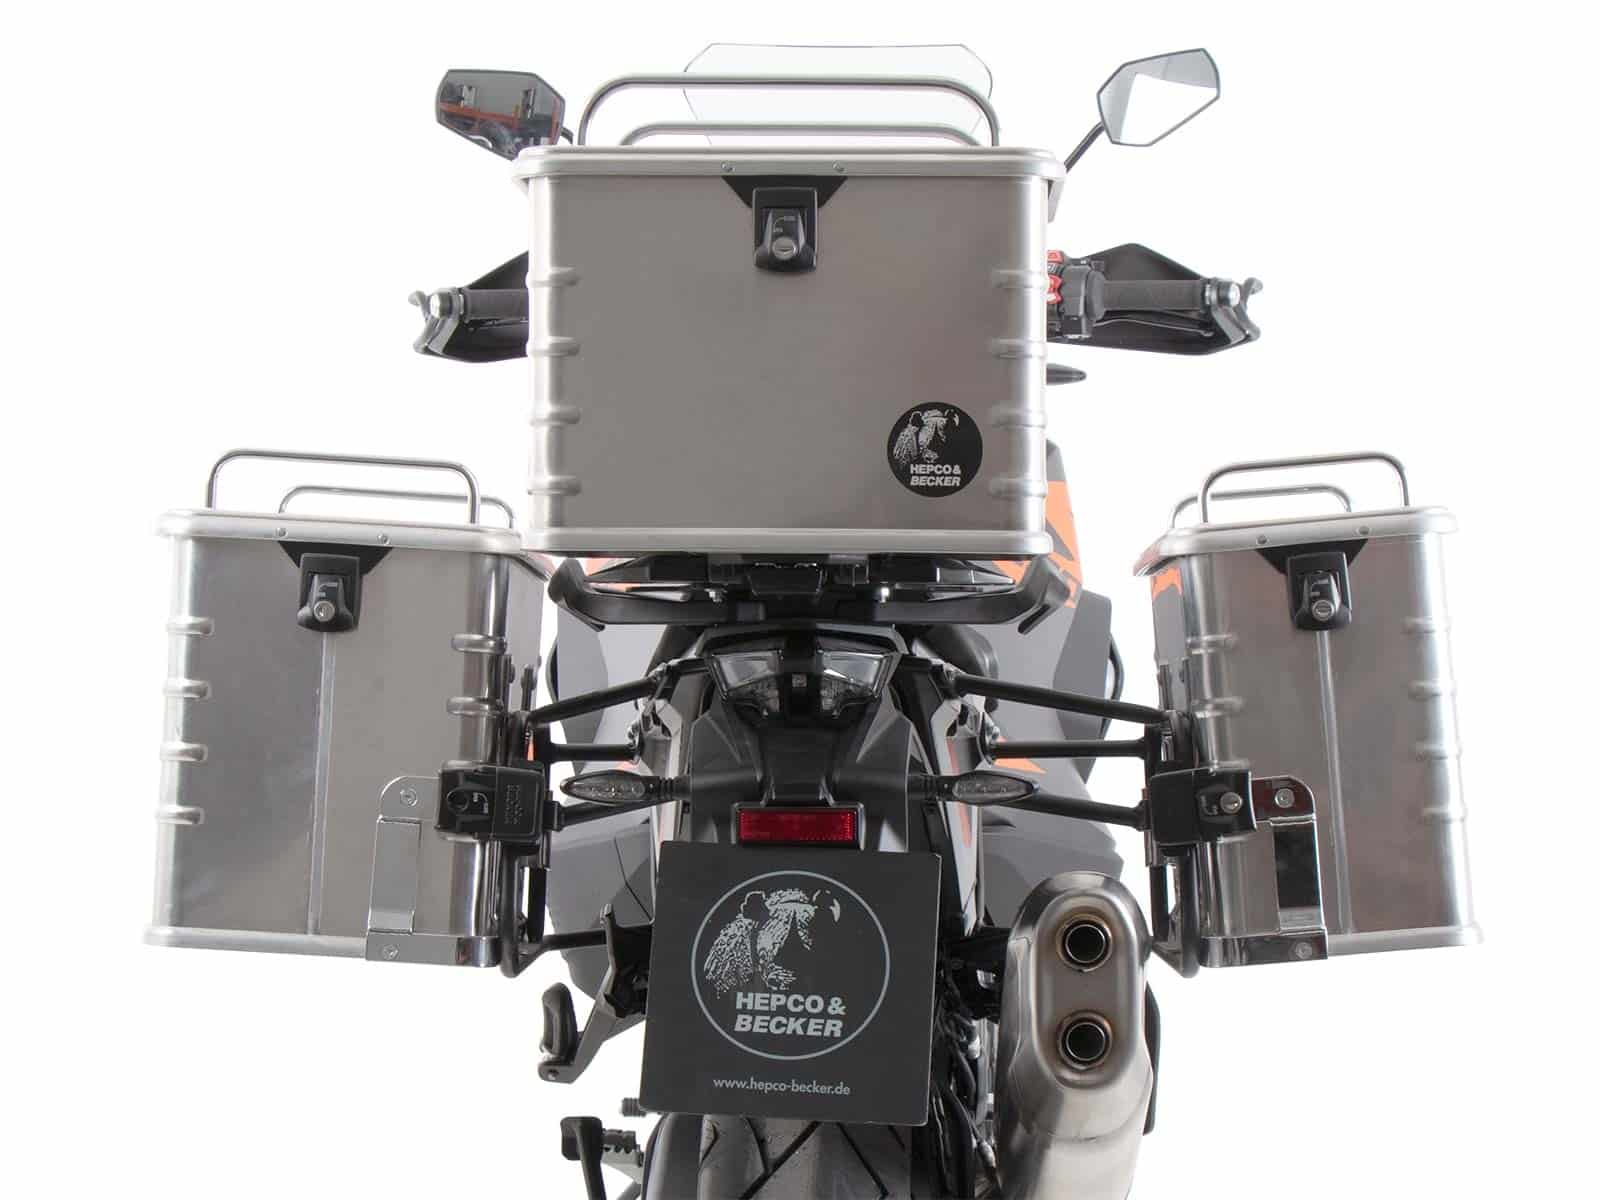 Sidecarrier permanent mounted black for KTM 1290 Super Adventure S/R (2021-)